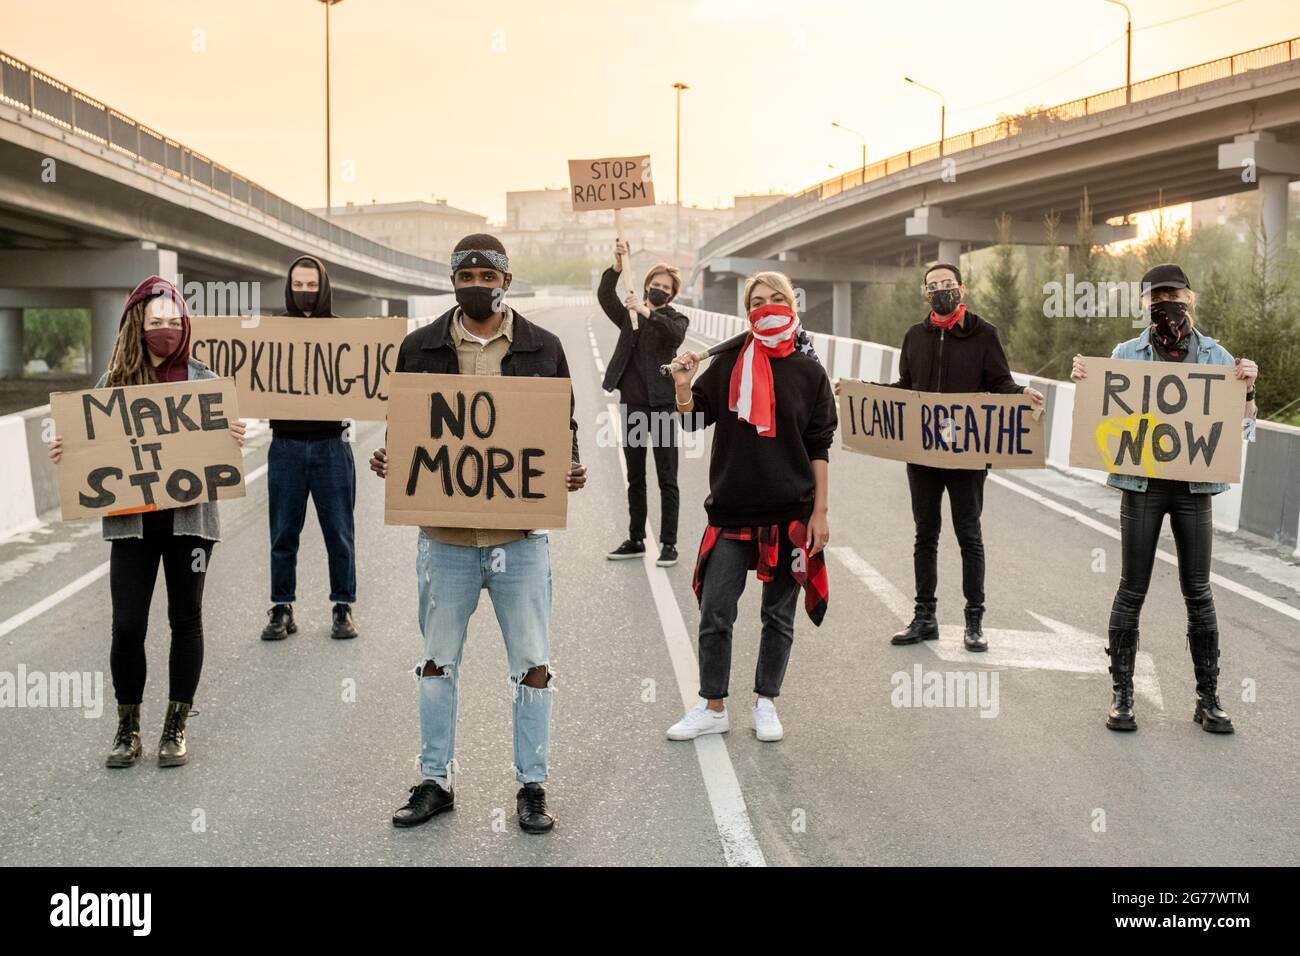 Group of young multi-ethnic people in cloth masks standing on road while protesting on street Stock Photo